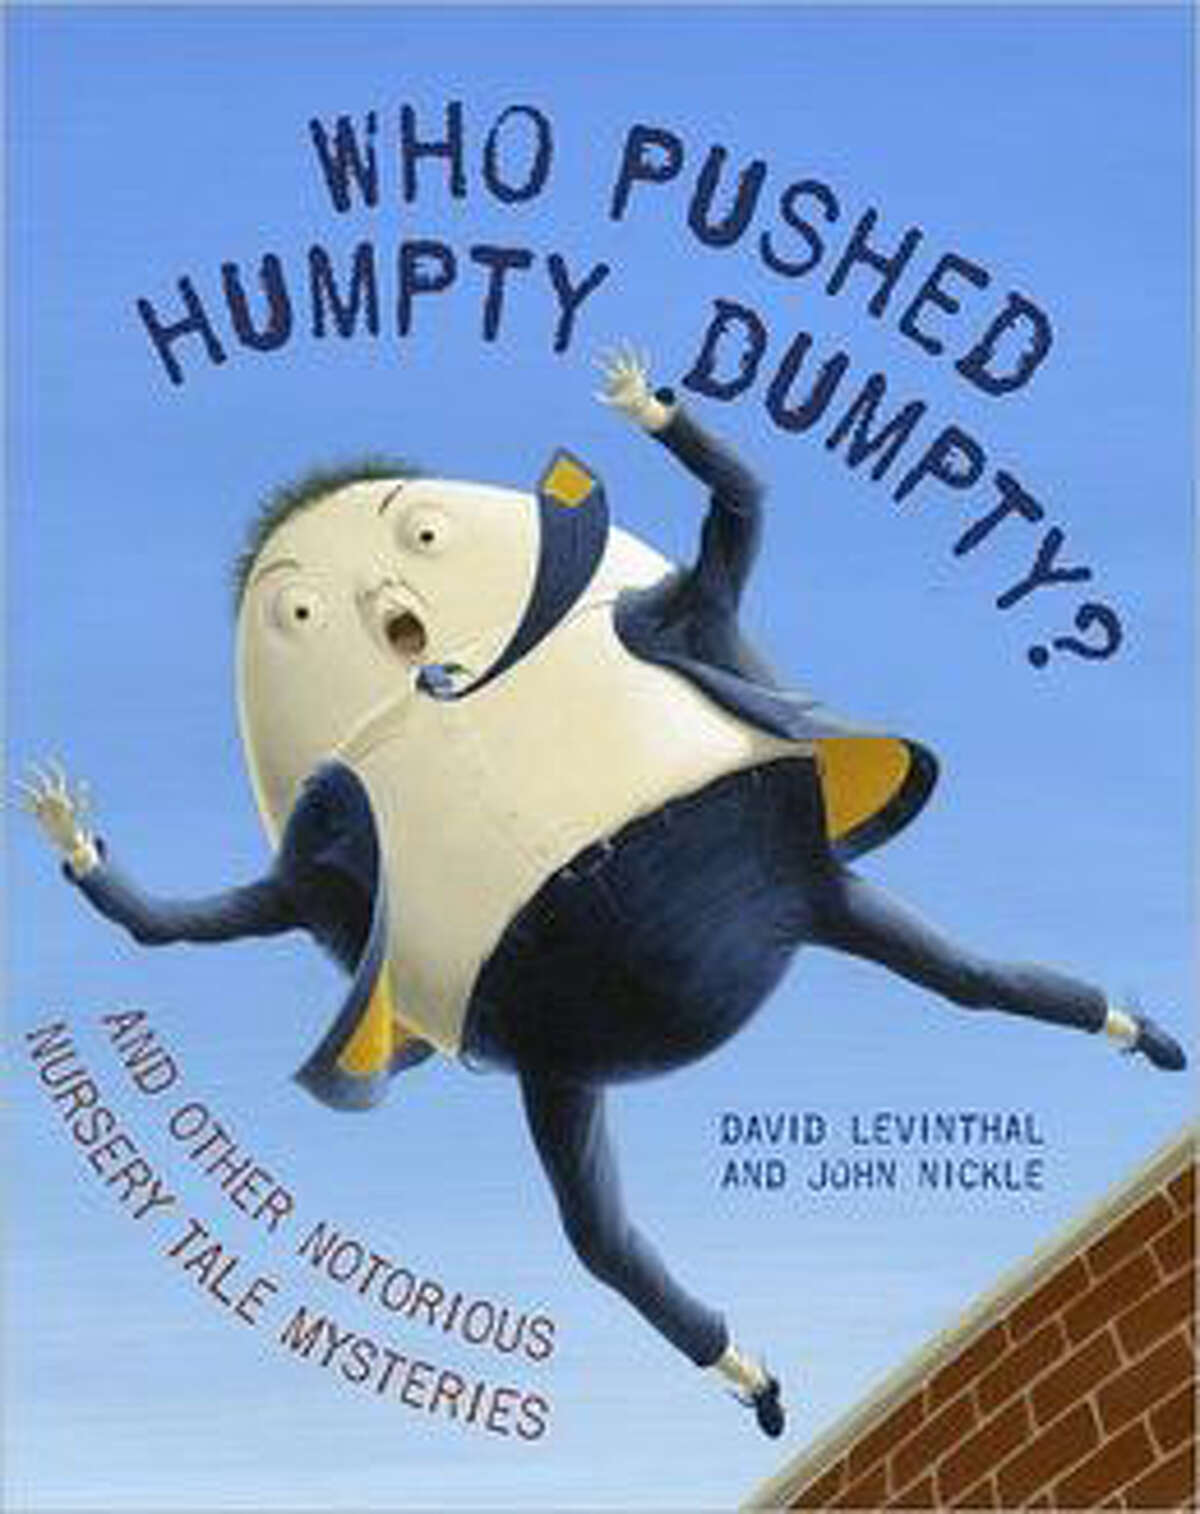 "Who Pushed Humpty Dumpty? and Other Notorious Nursery Tale Mysteries" by David Leviinthal and John Nickle